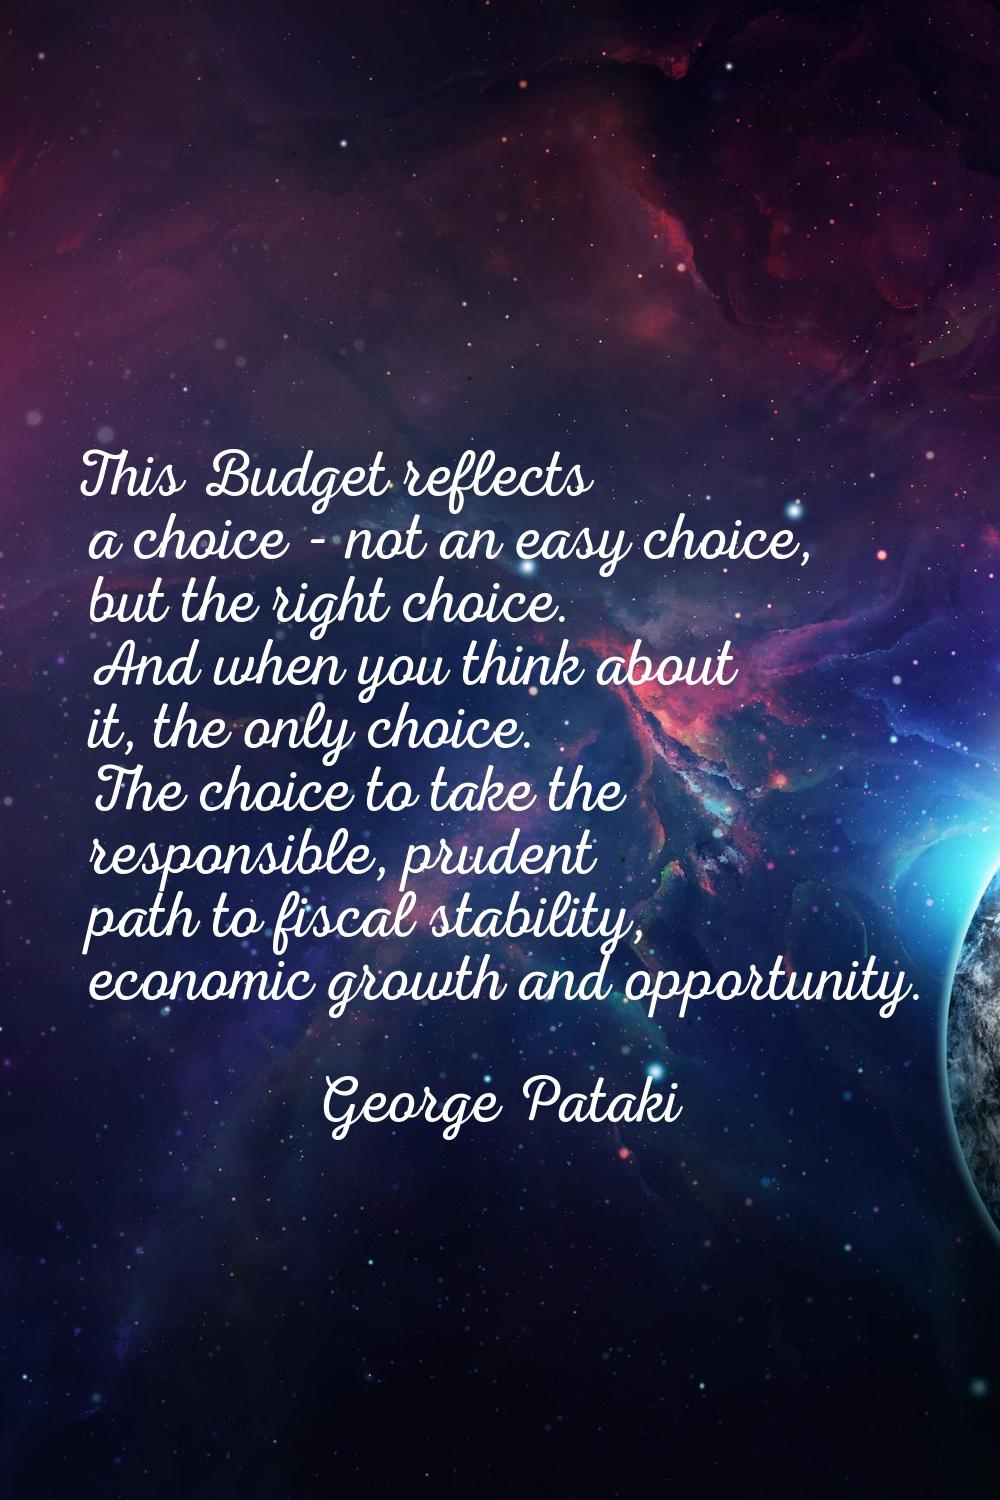 This Budget reflects a choice - not an easy choice, but the right choice. And when you think about 